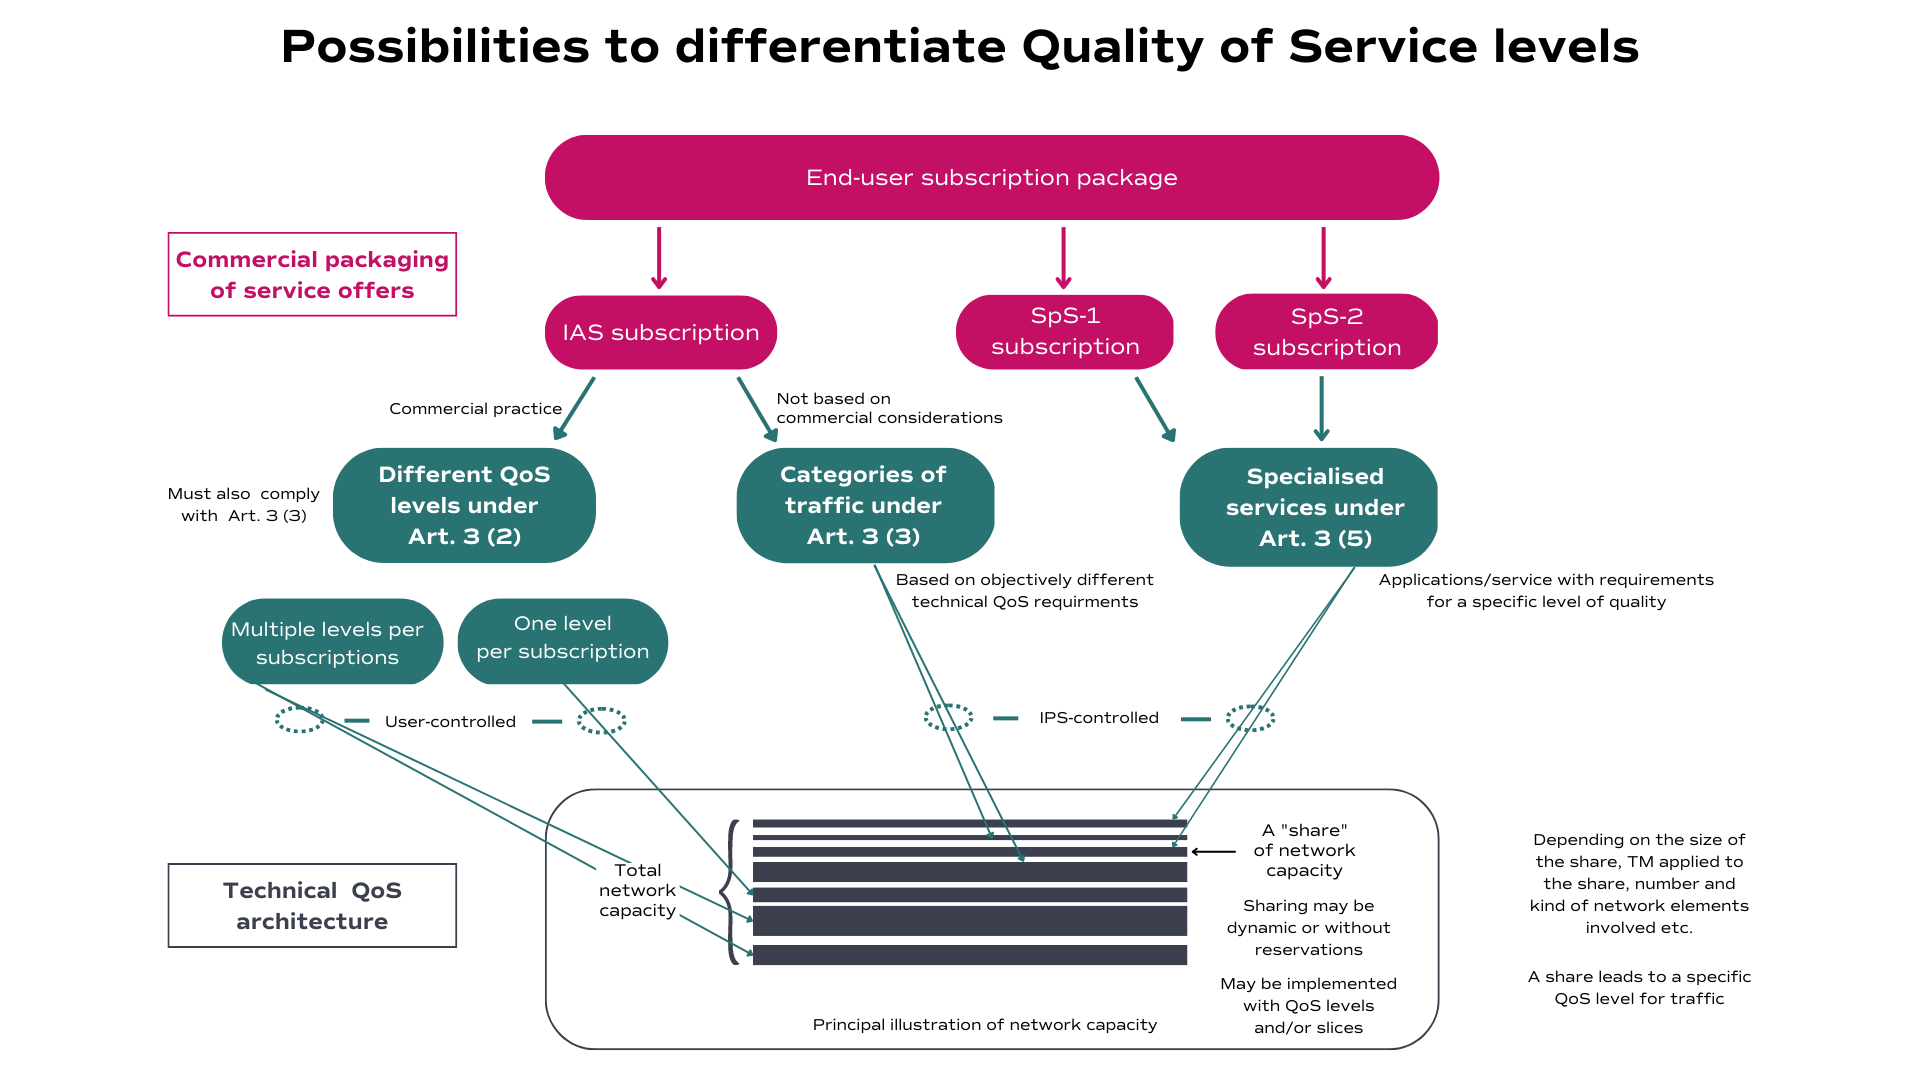 The image includes a flow chart that schematically illustrates possibilities to differentiate Quality of Services levels, with a long description of this flowchart available below the image